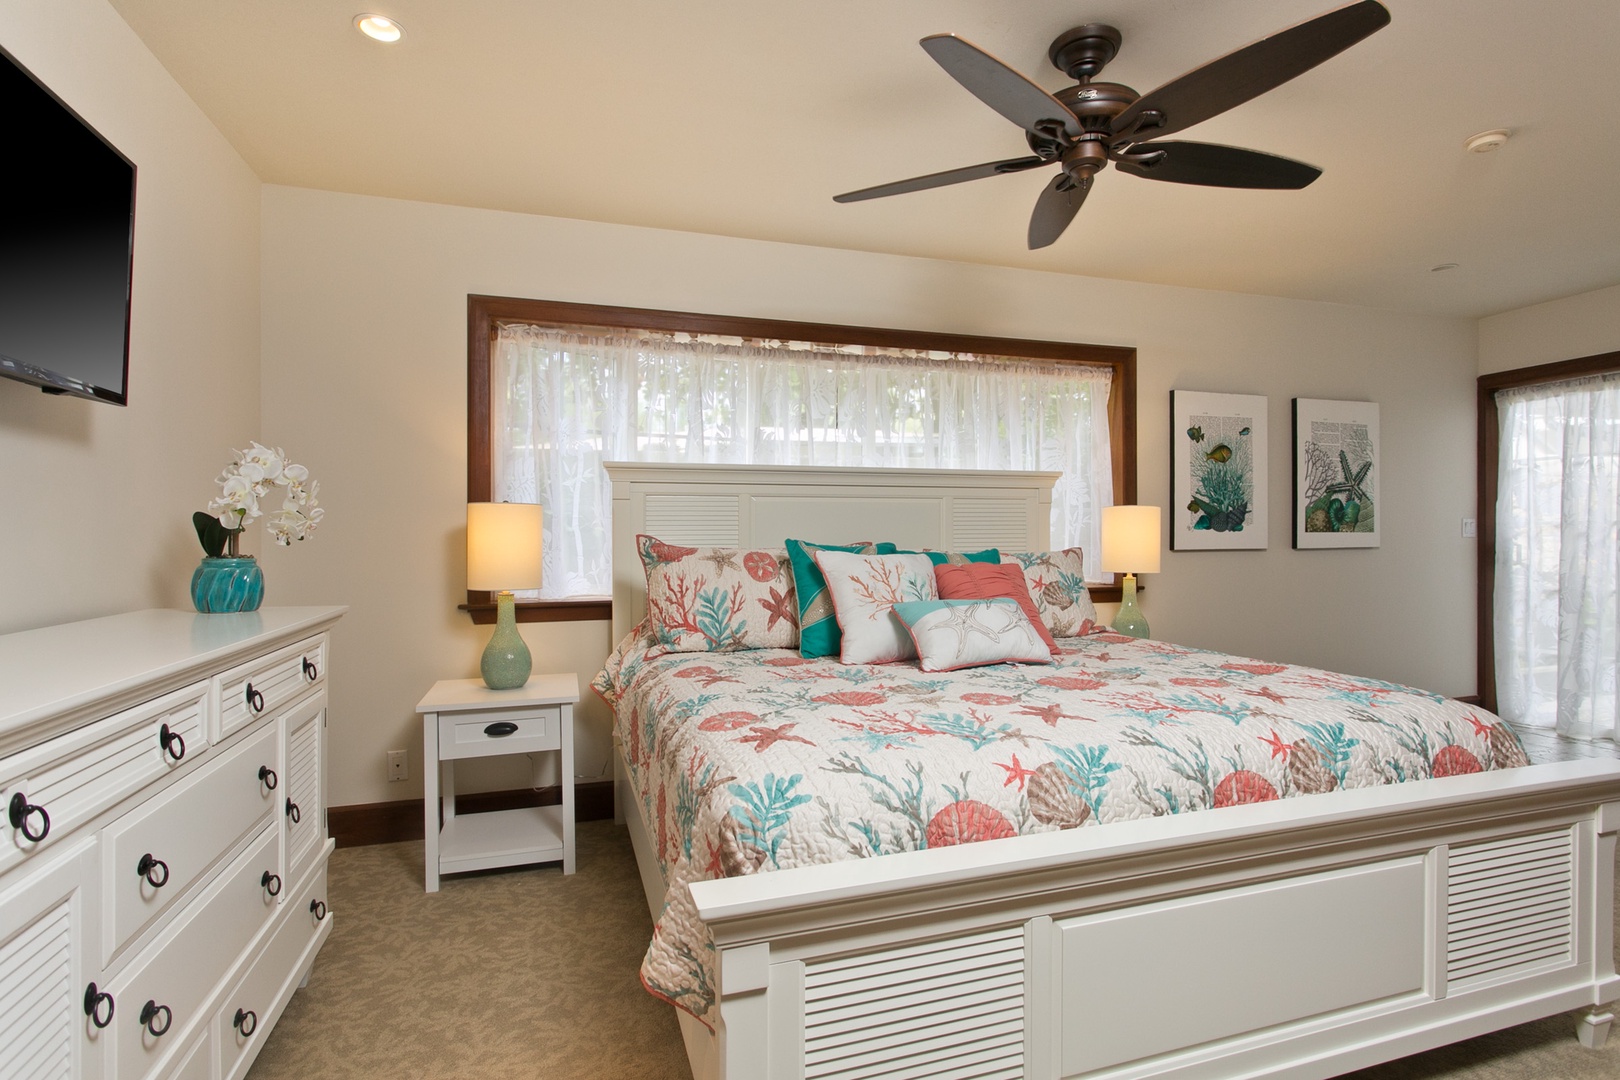 Kailua Vacation Rentals, Lanikai Village* - Hale Melia: Guest bedroom with a plush king bed, ensuite, TV and a dedicated work space.